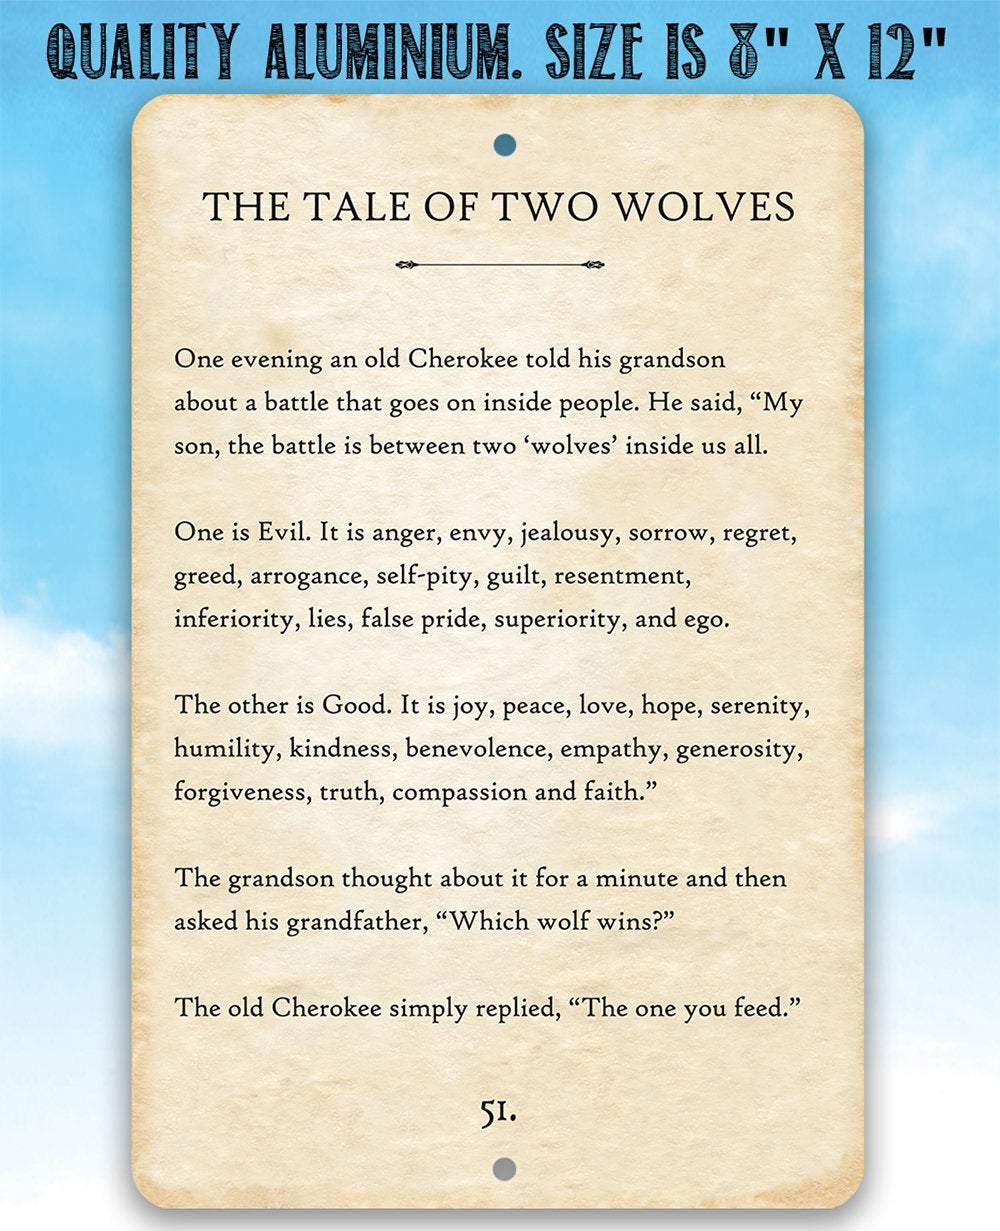 The Tale of Two Wolves - Metal Sign | Lone Star Art.